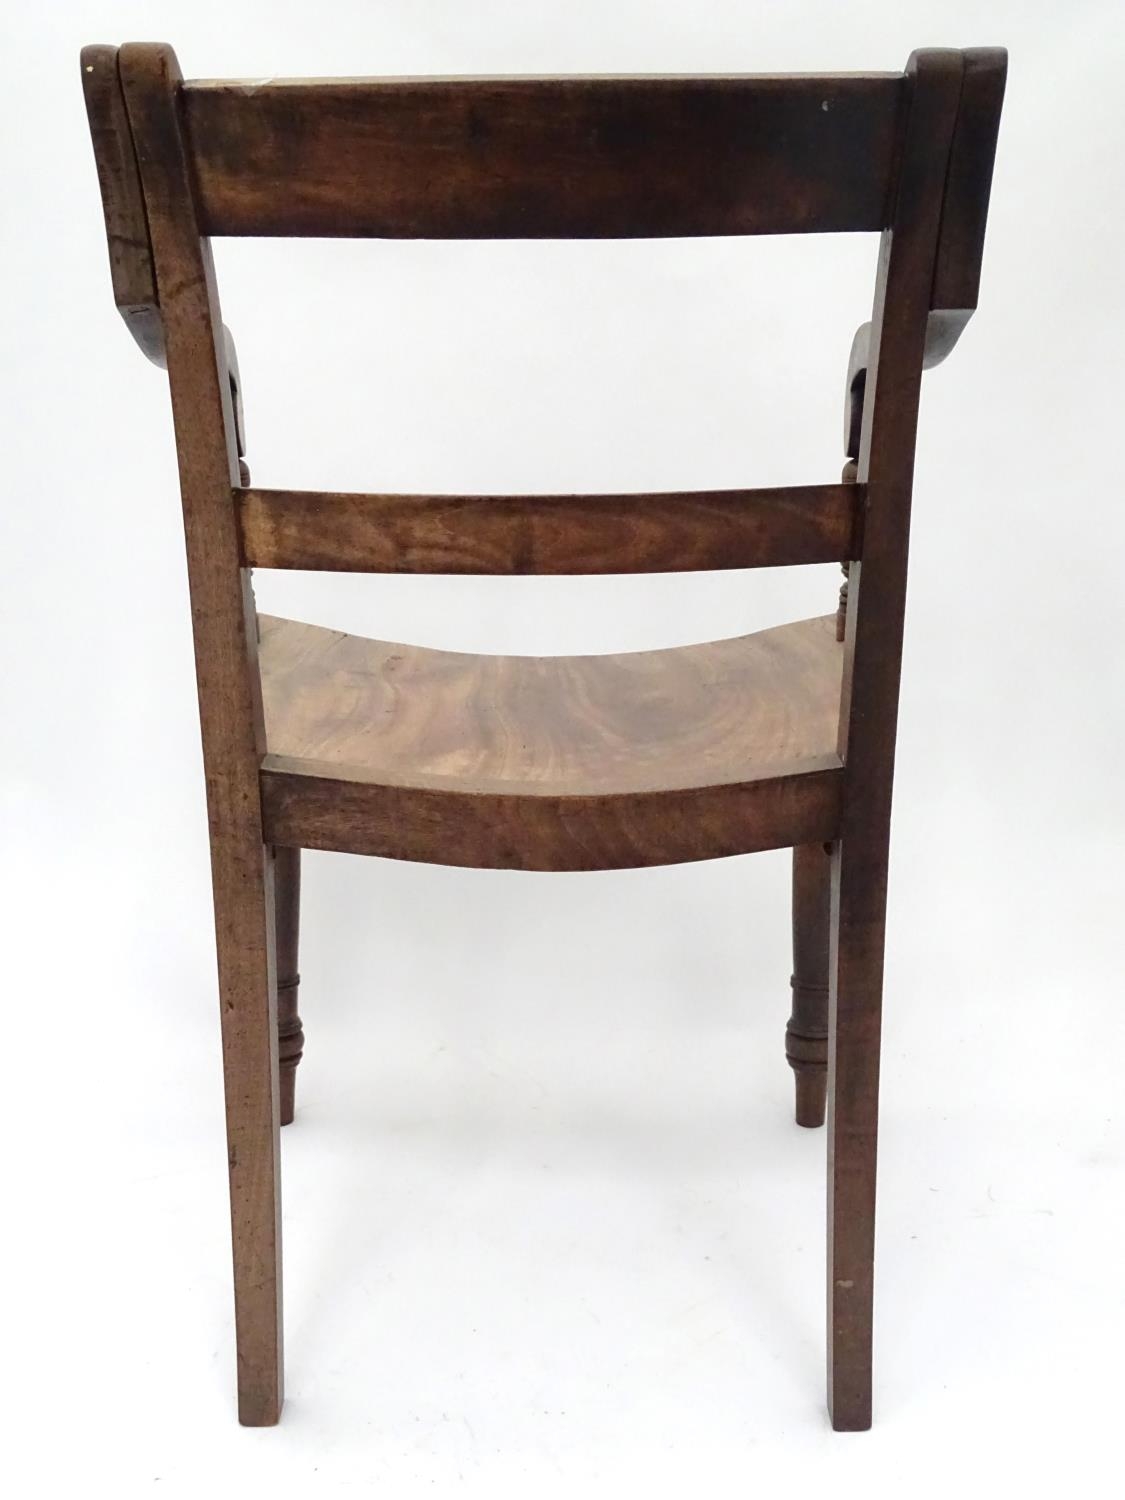 A Regency mahogany carver chair Please Note - we do not make reference to the condition of lots - Image 2 of 4